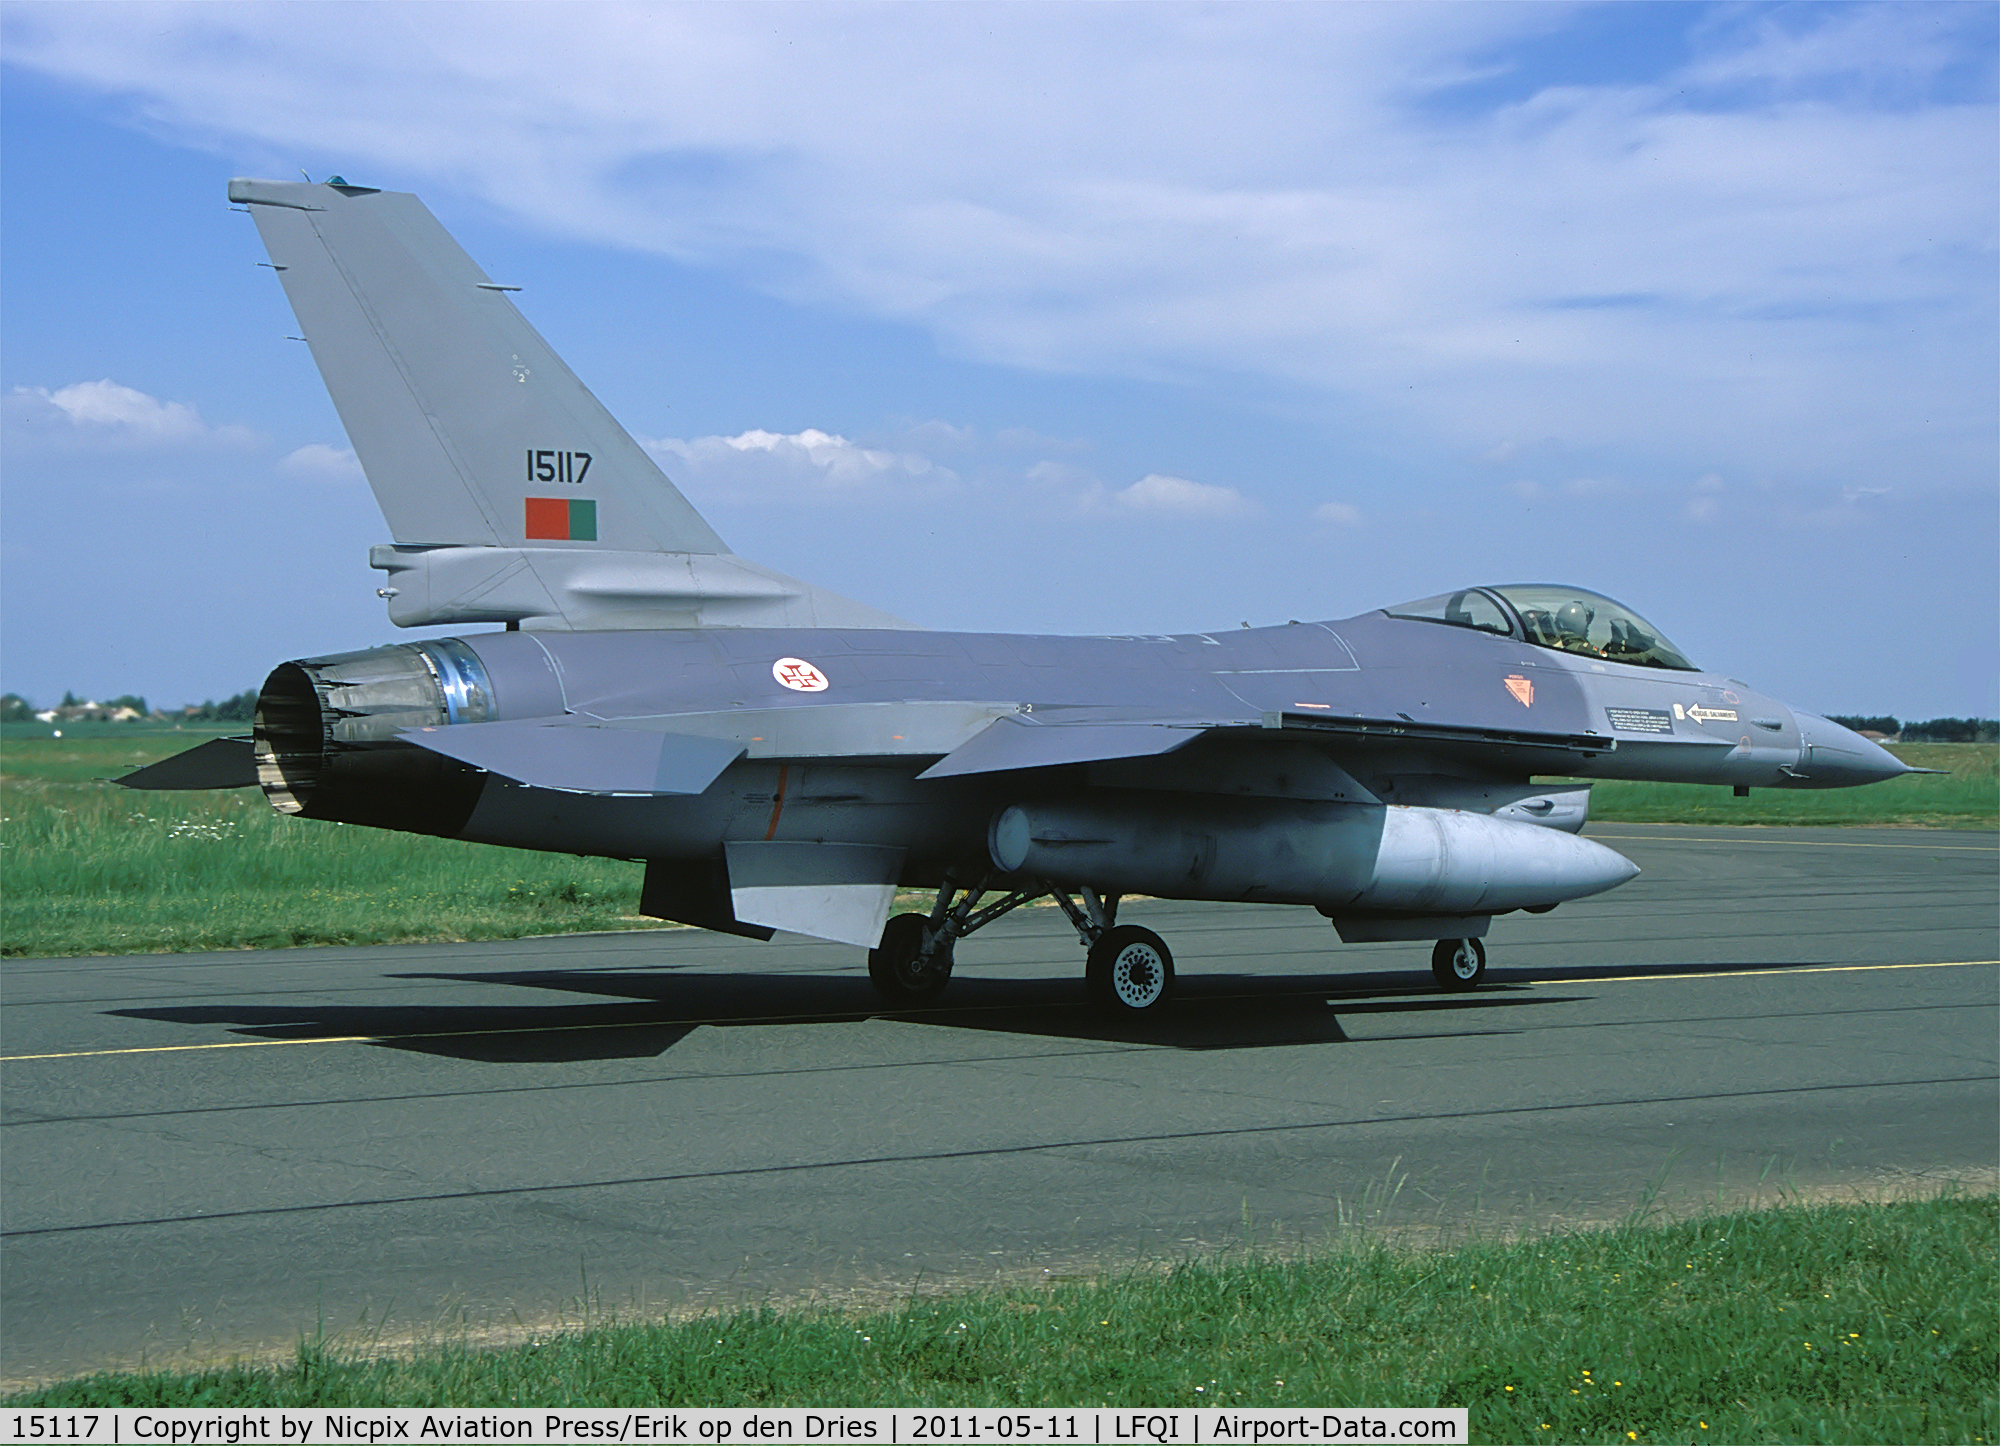 15117, 1993 Lockheed F-16A Fighting Falcon C/N AA-17, Portugal AF F-16AM 15117 was one of the participants in the 2011 edition of the NATO Tigermeet.